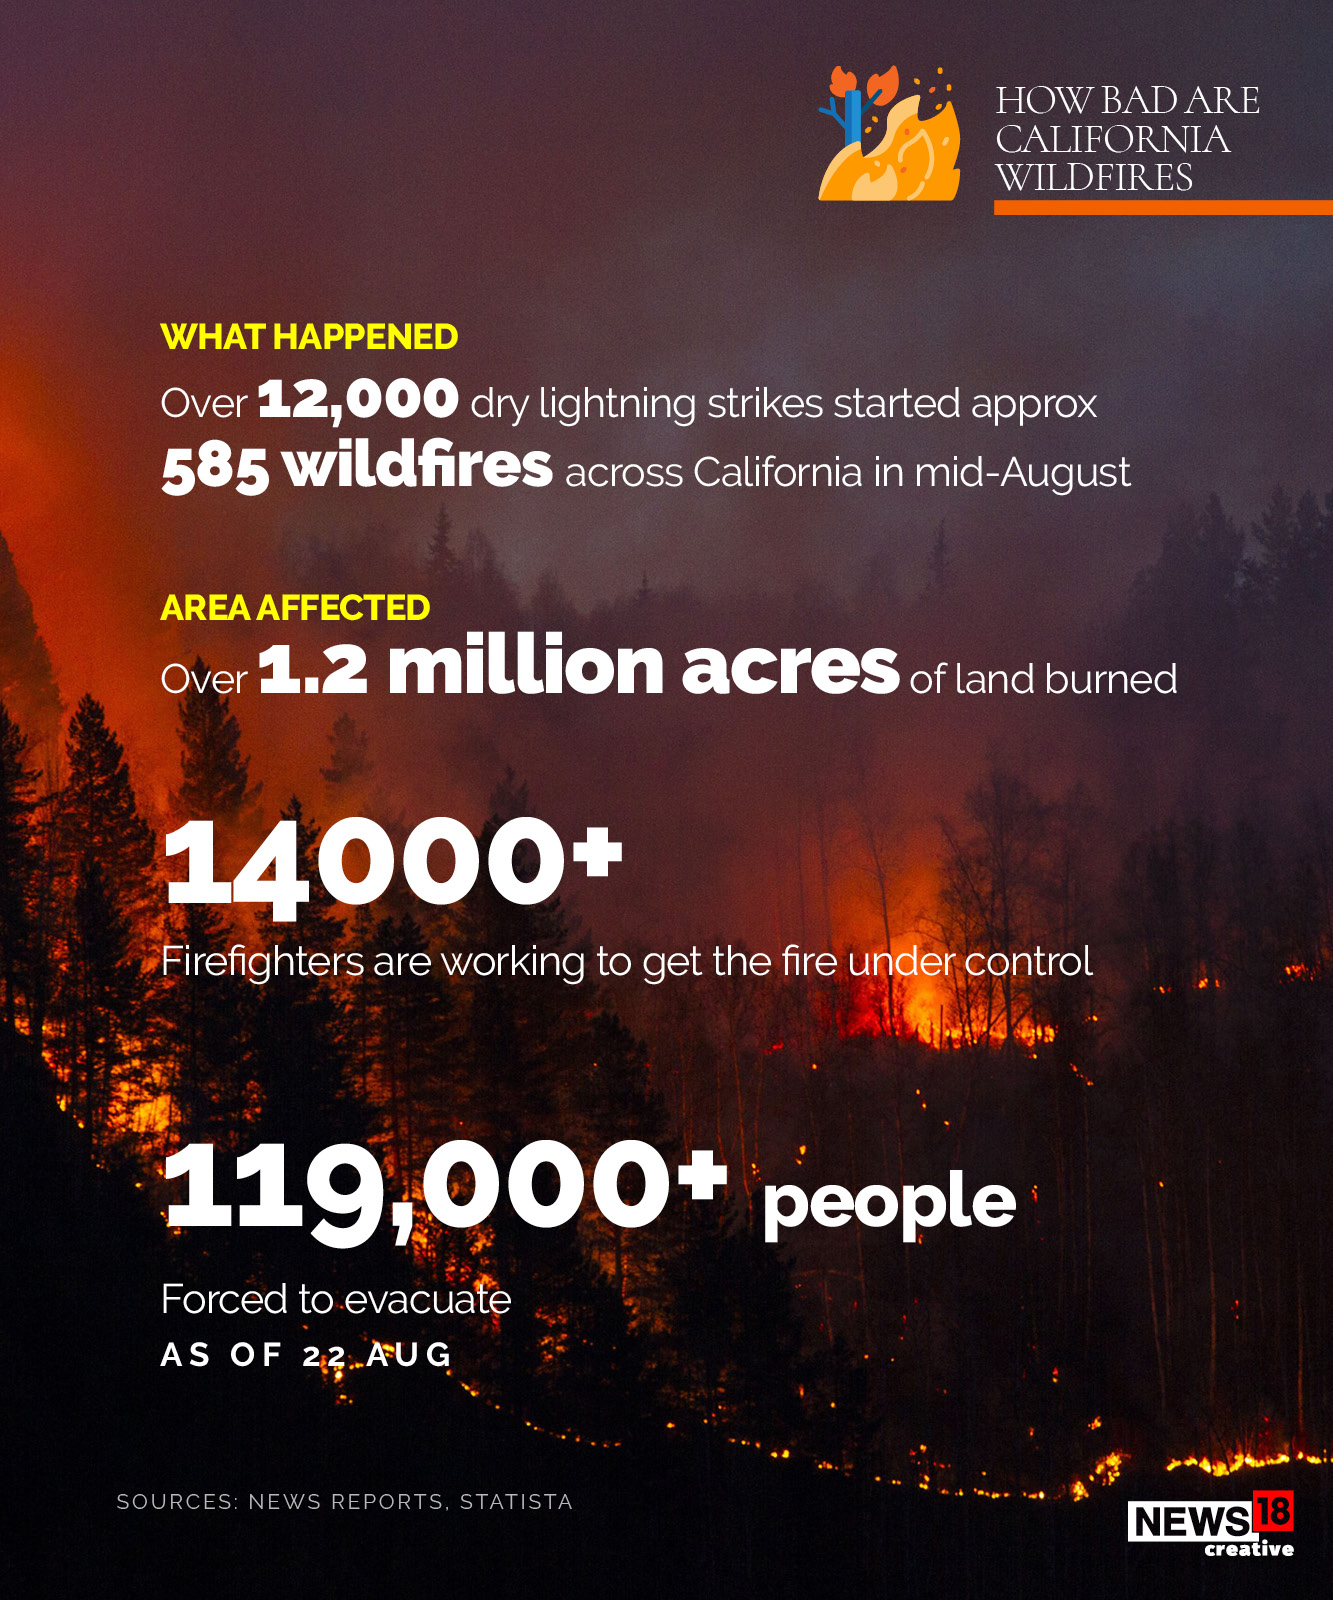 California burning: Is the worst of climate change here?